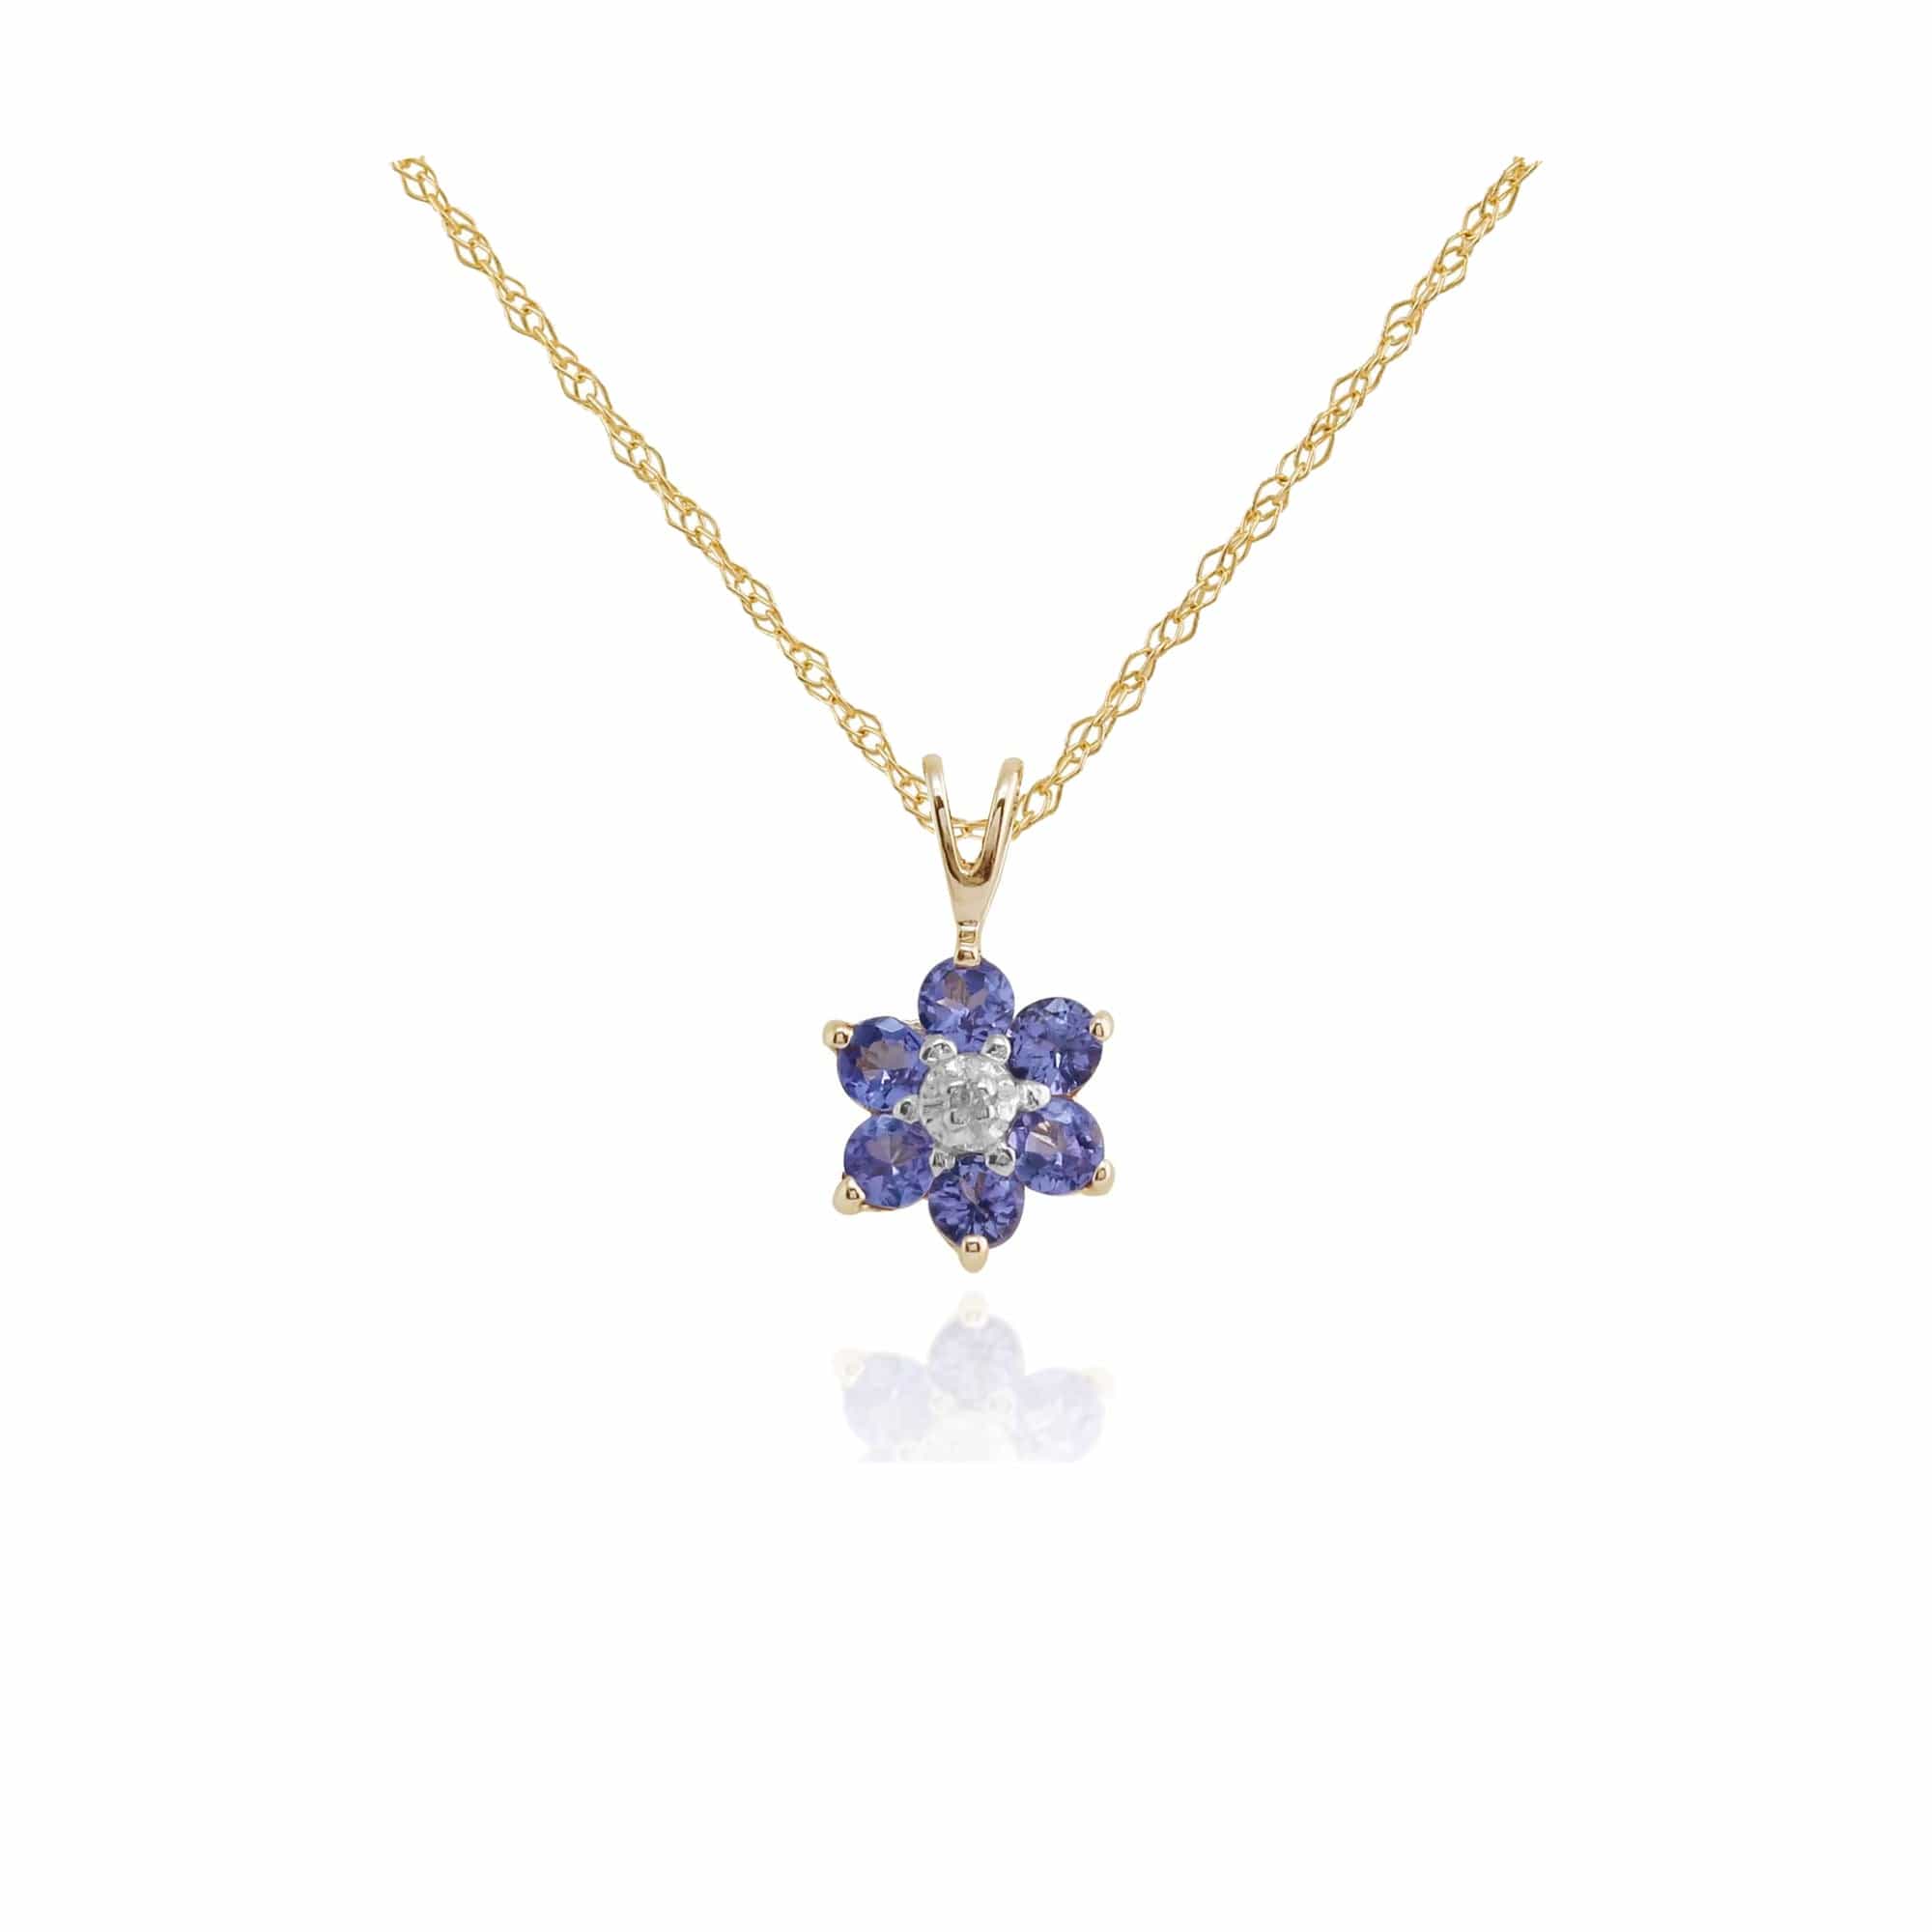 Photos - Pendant / Choker Necklace Floral Round Tanzanite & Diamond Cluster Pendant in 9ct Yellow Gold